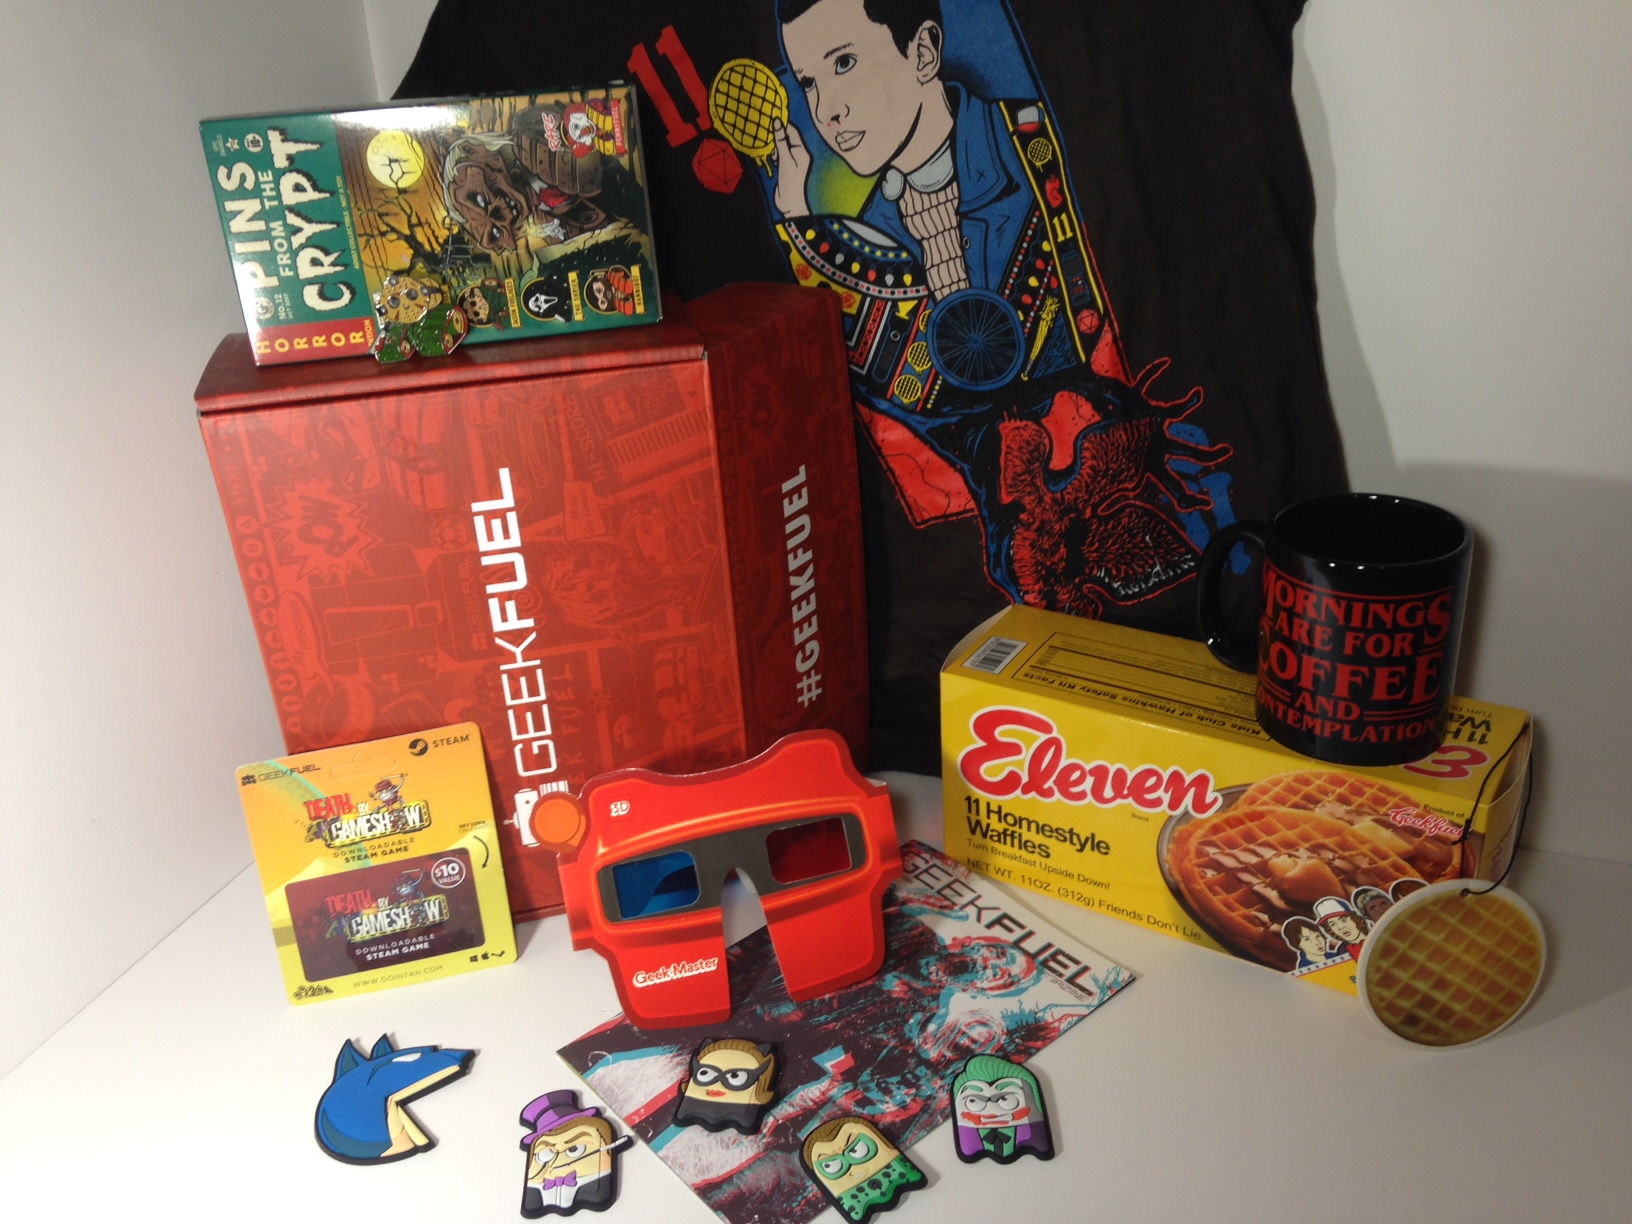 Geek insider, geekinsider, geekinsider. Com,, unboxing geek fuel's mystery box for october 2017 - get $3 off!! , reviews